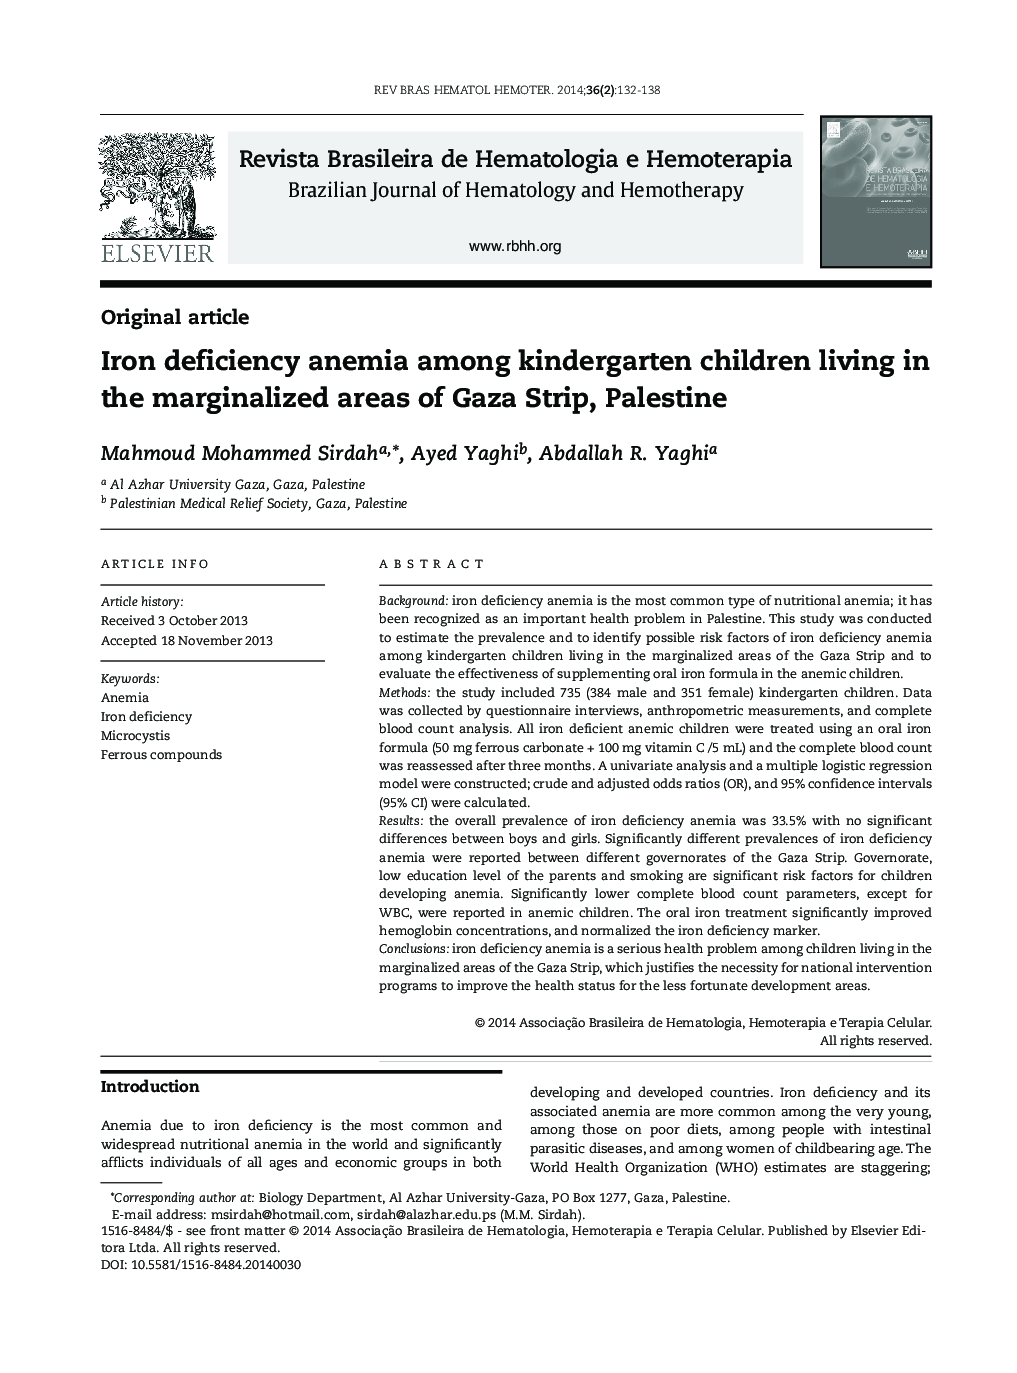 Iron deficiency anemia among kindergarten children living in the marginalized areas of Gaza Strip Palestine